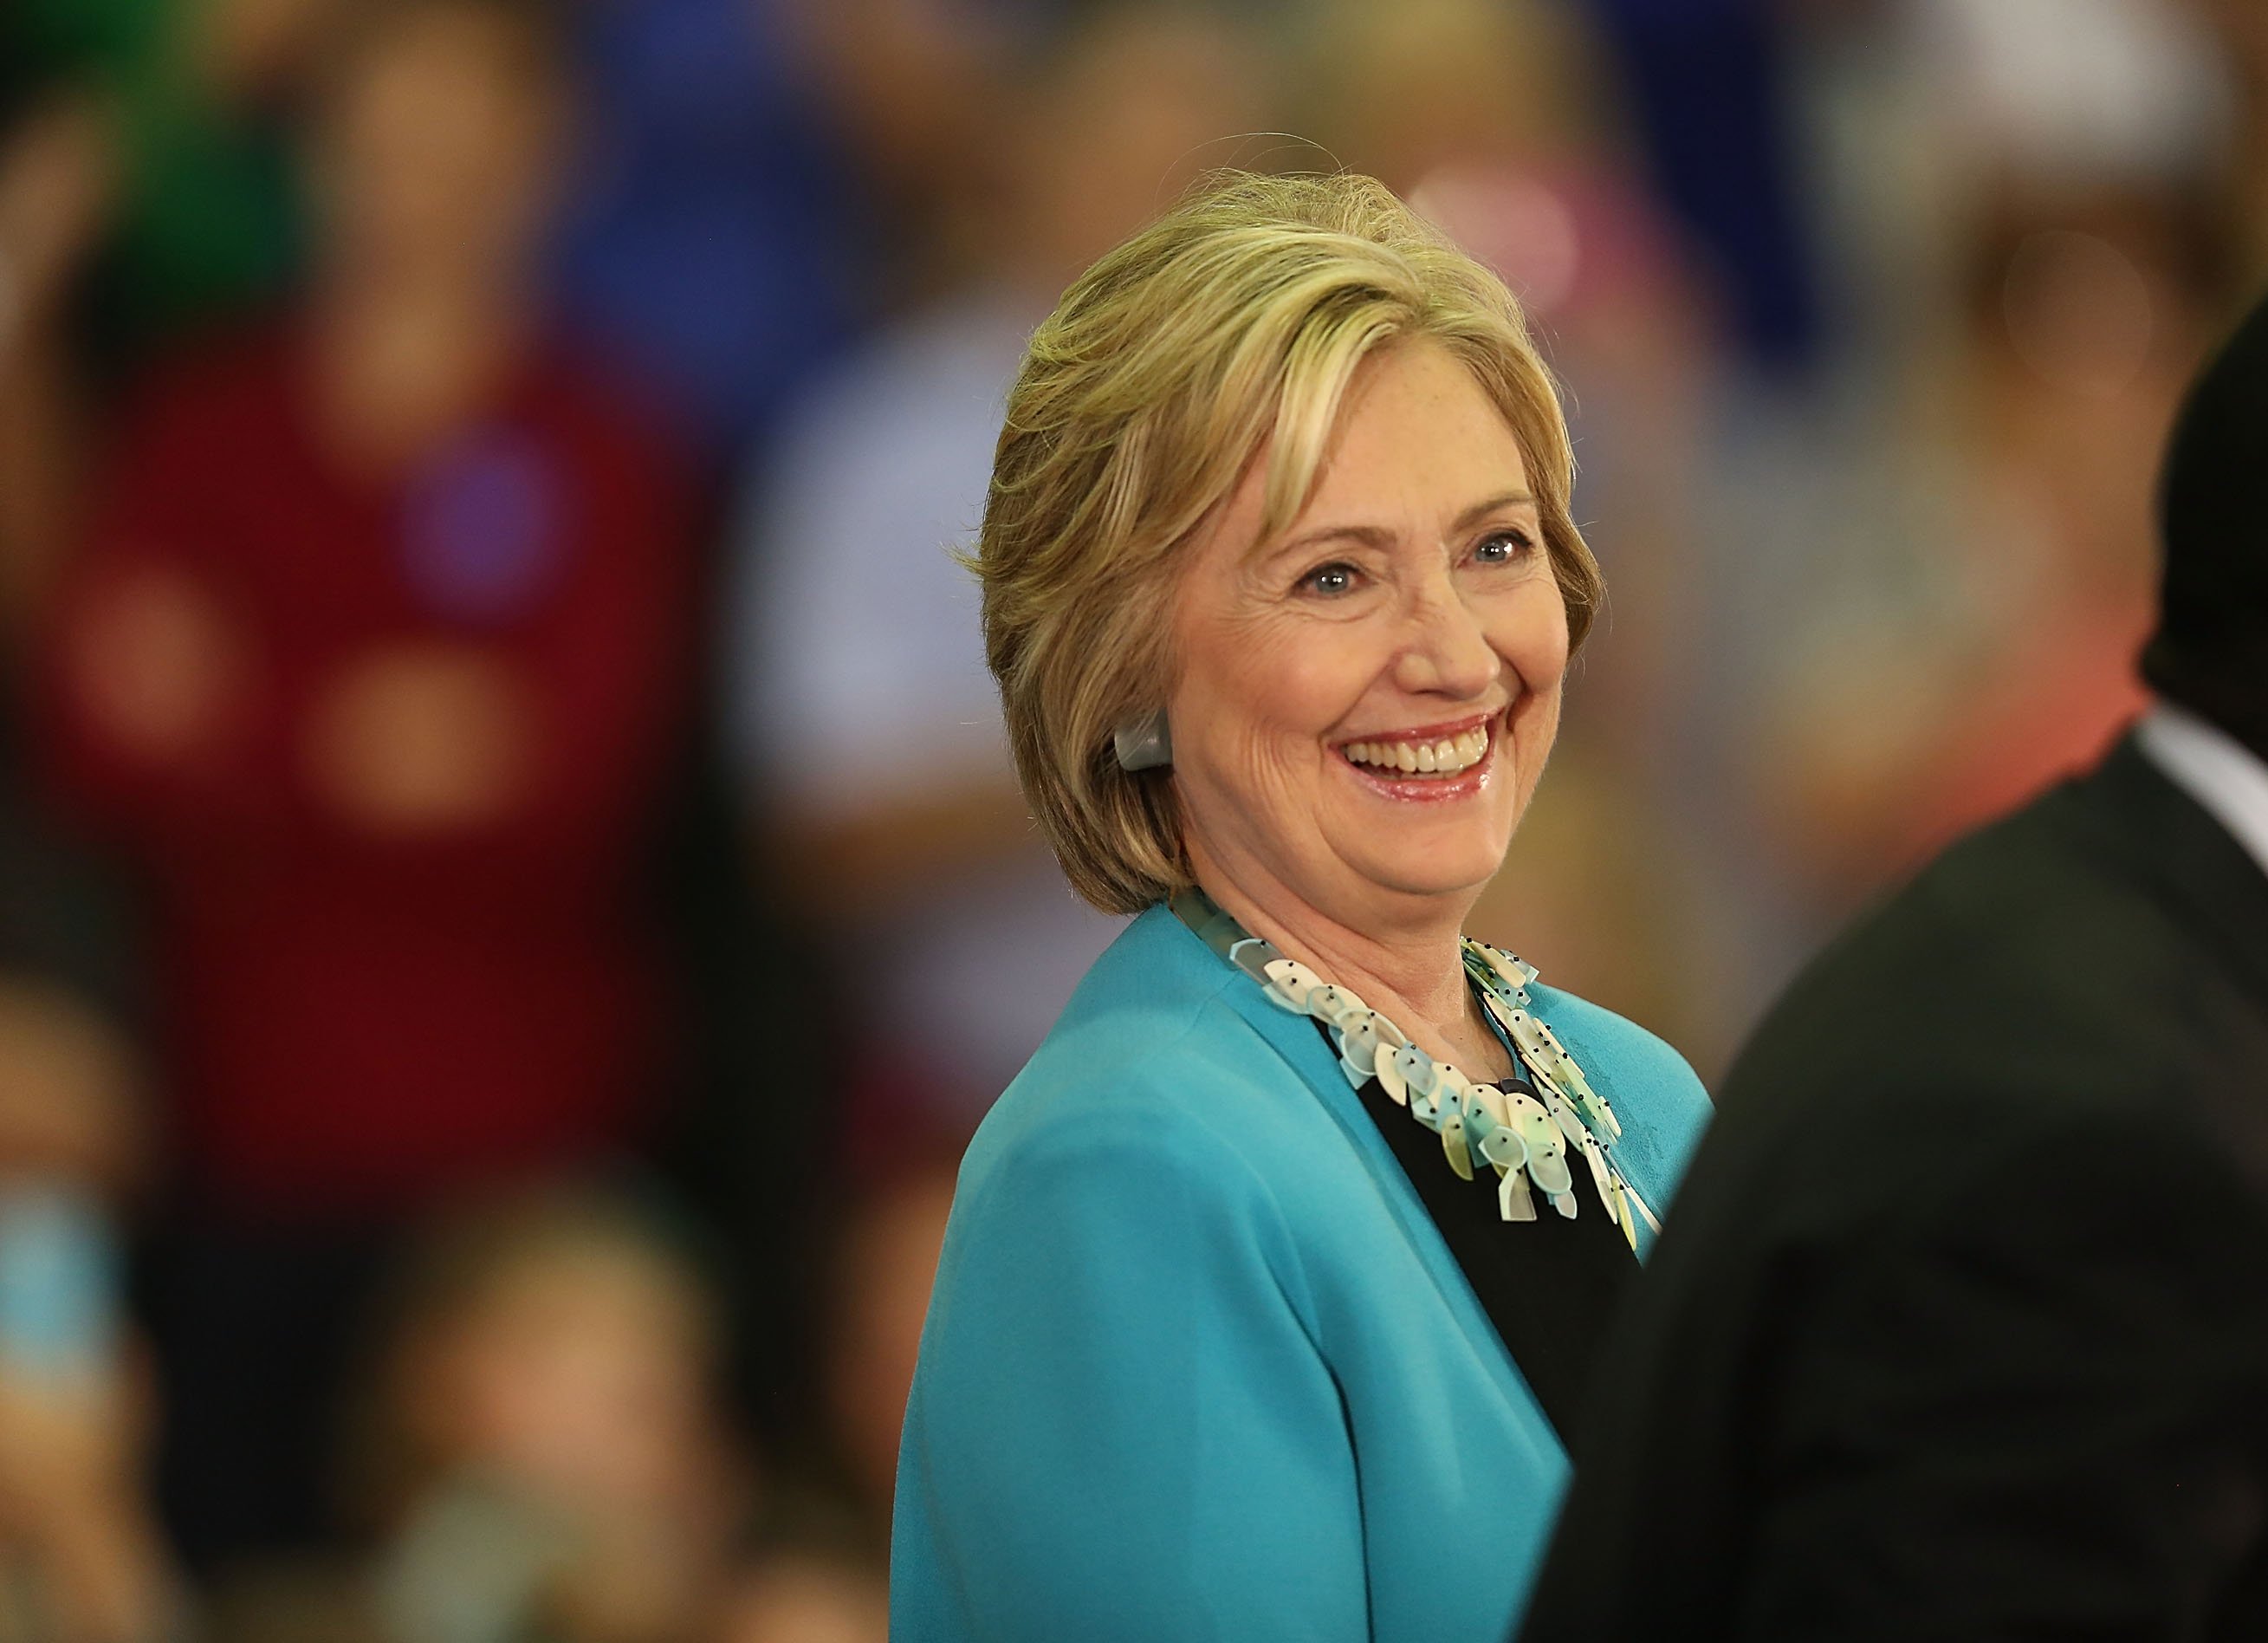 Hillary Clinton laughs as she is introduced during her campaign stop at the Broward College  Hugh Adams Central Campus on October 2, 2015 in Davie, Florida. (Joe Raedle—Getty Images)